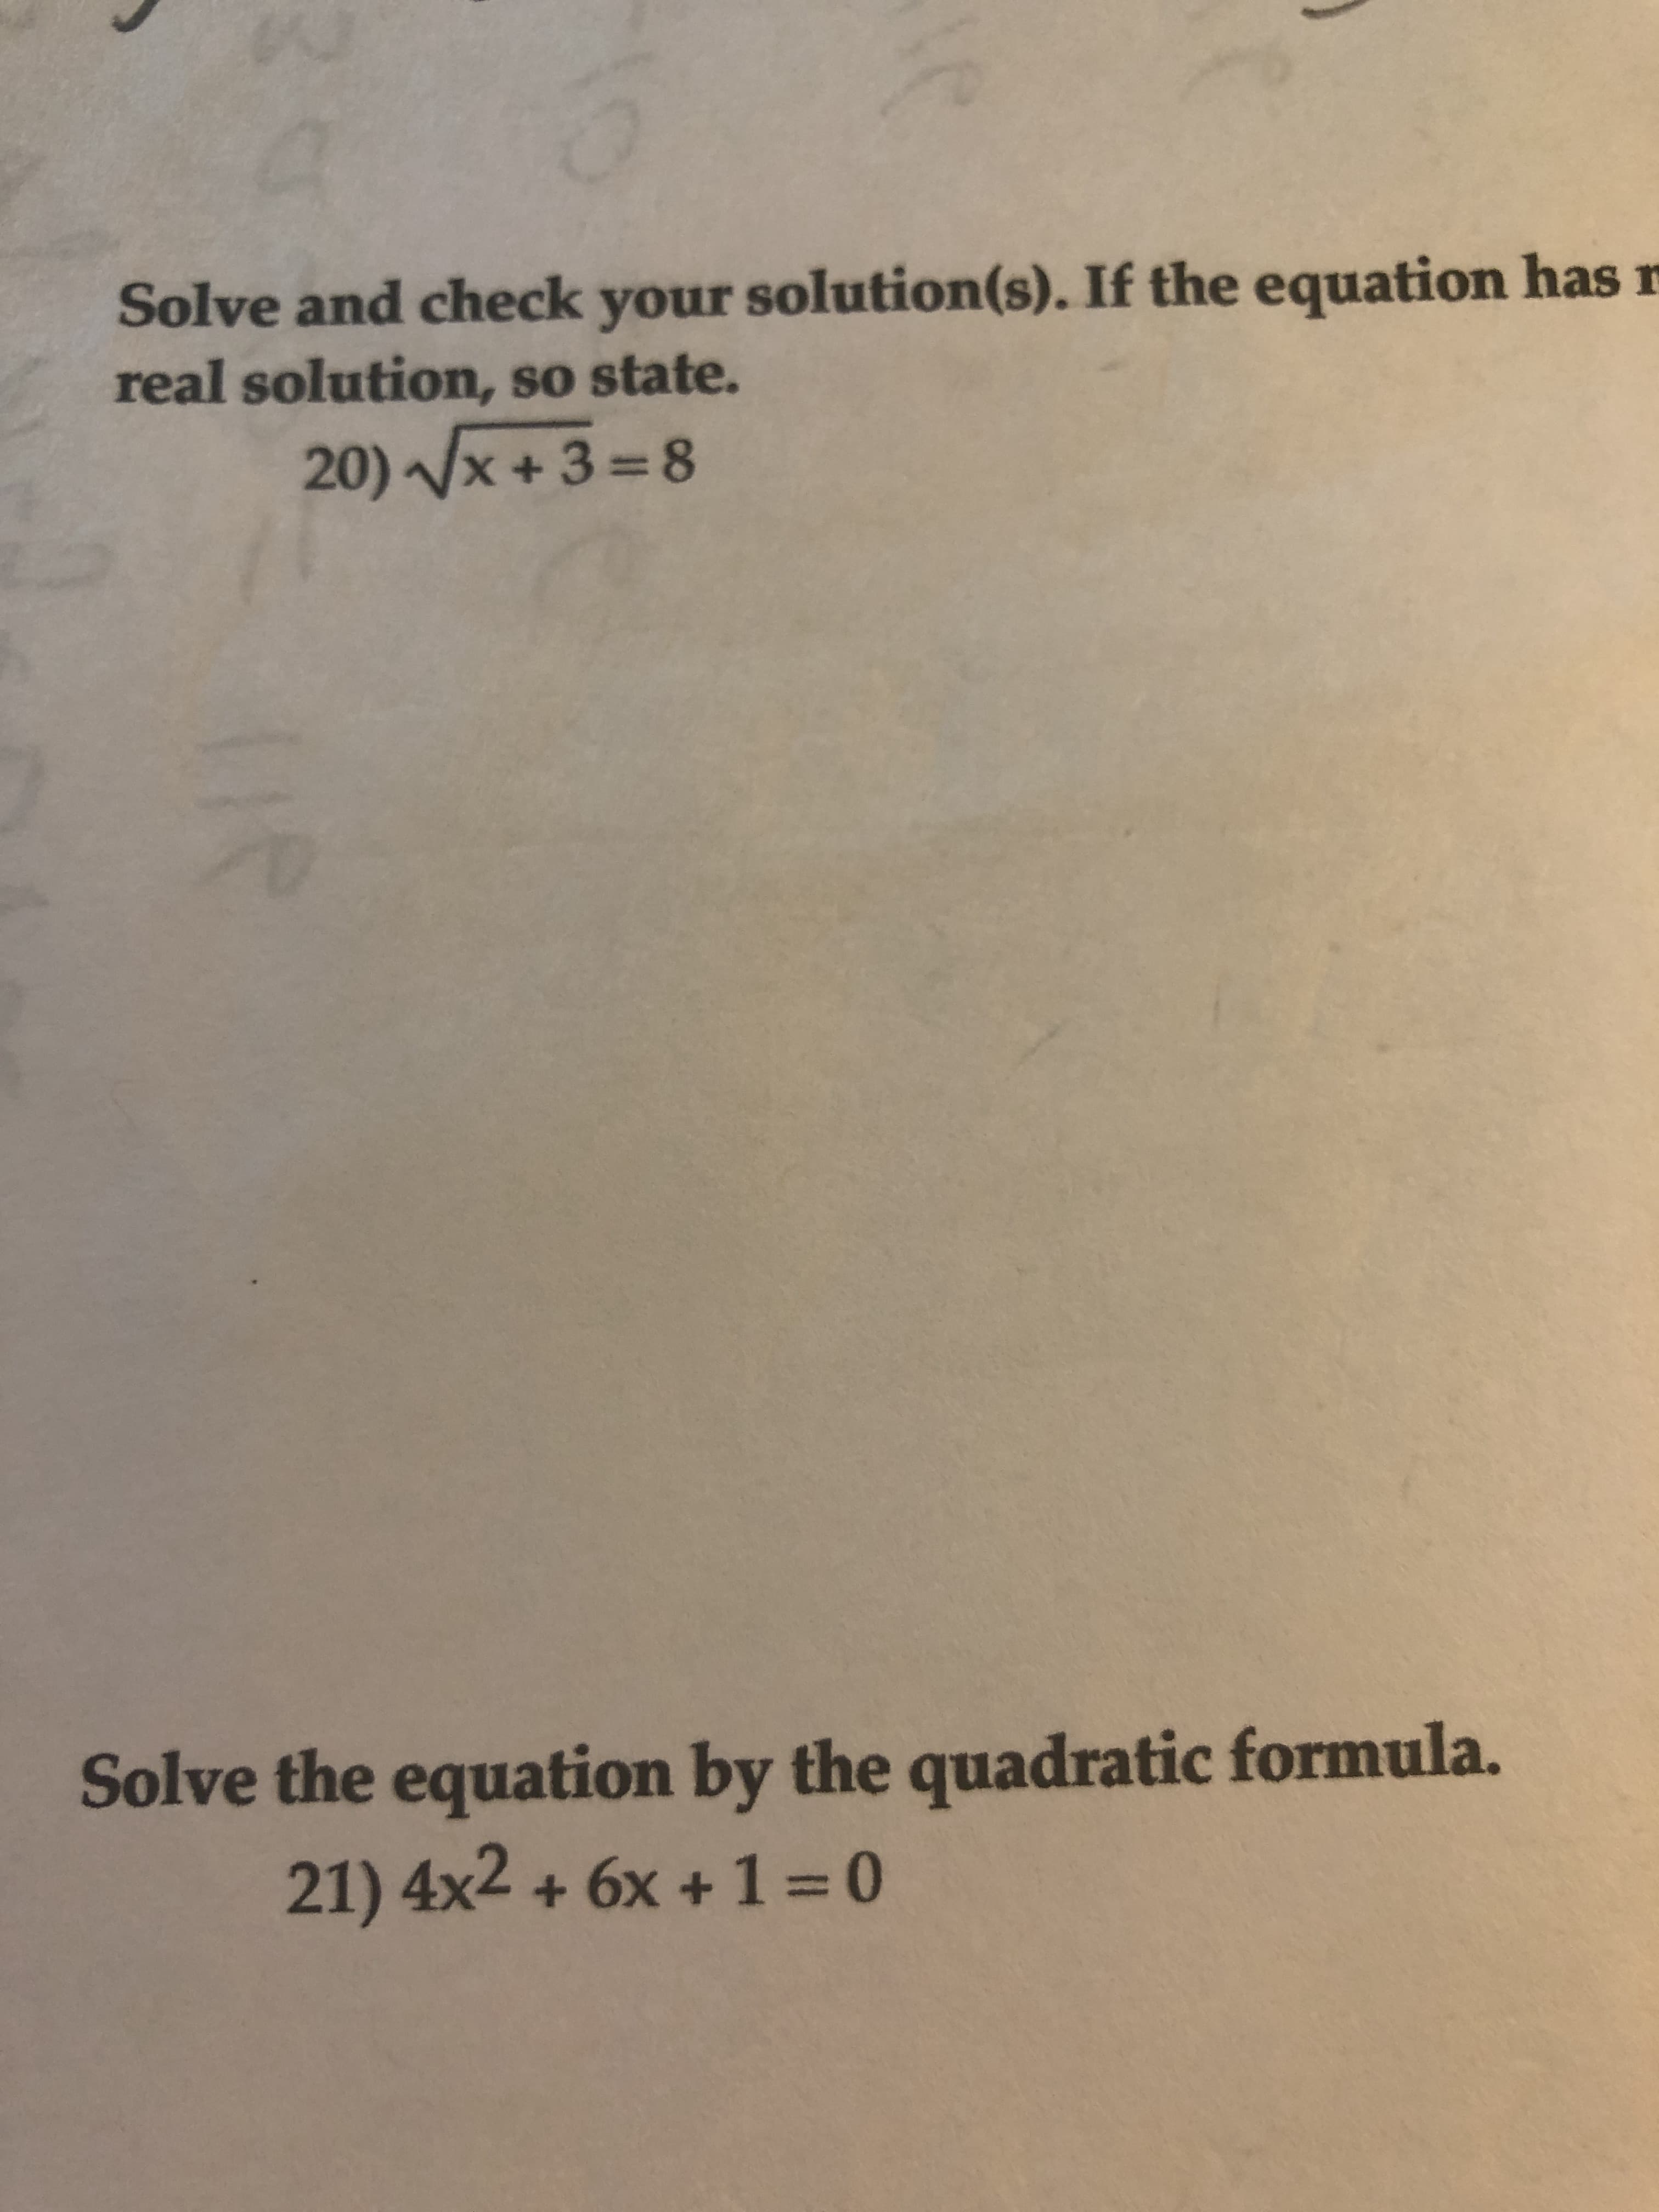 Solve and check your solution(s). If the equation has
real solution, so state.
20)Vx+3%3D8
